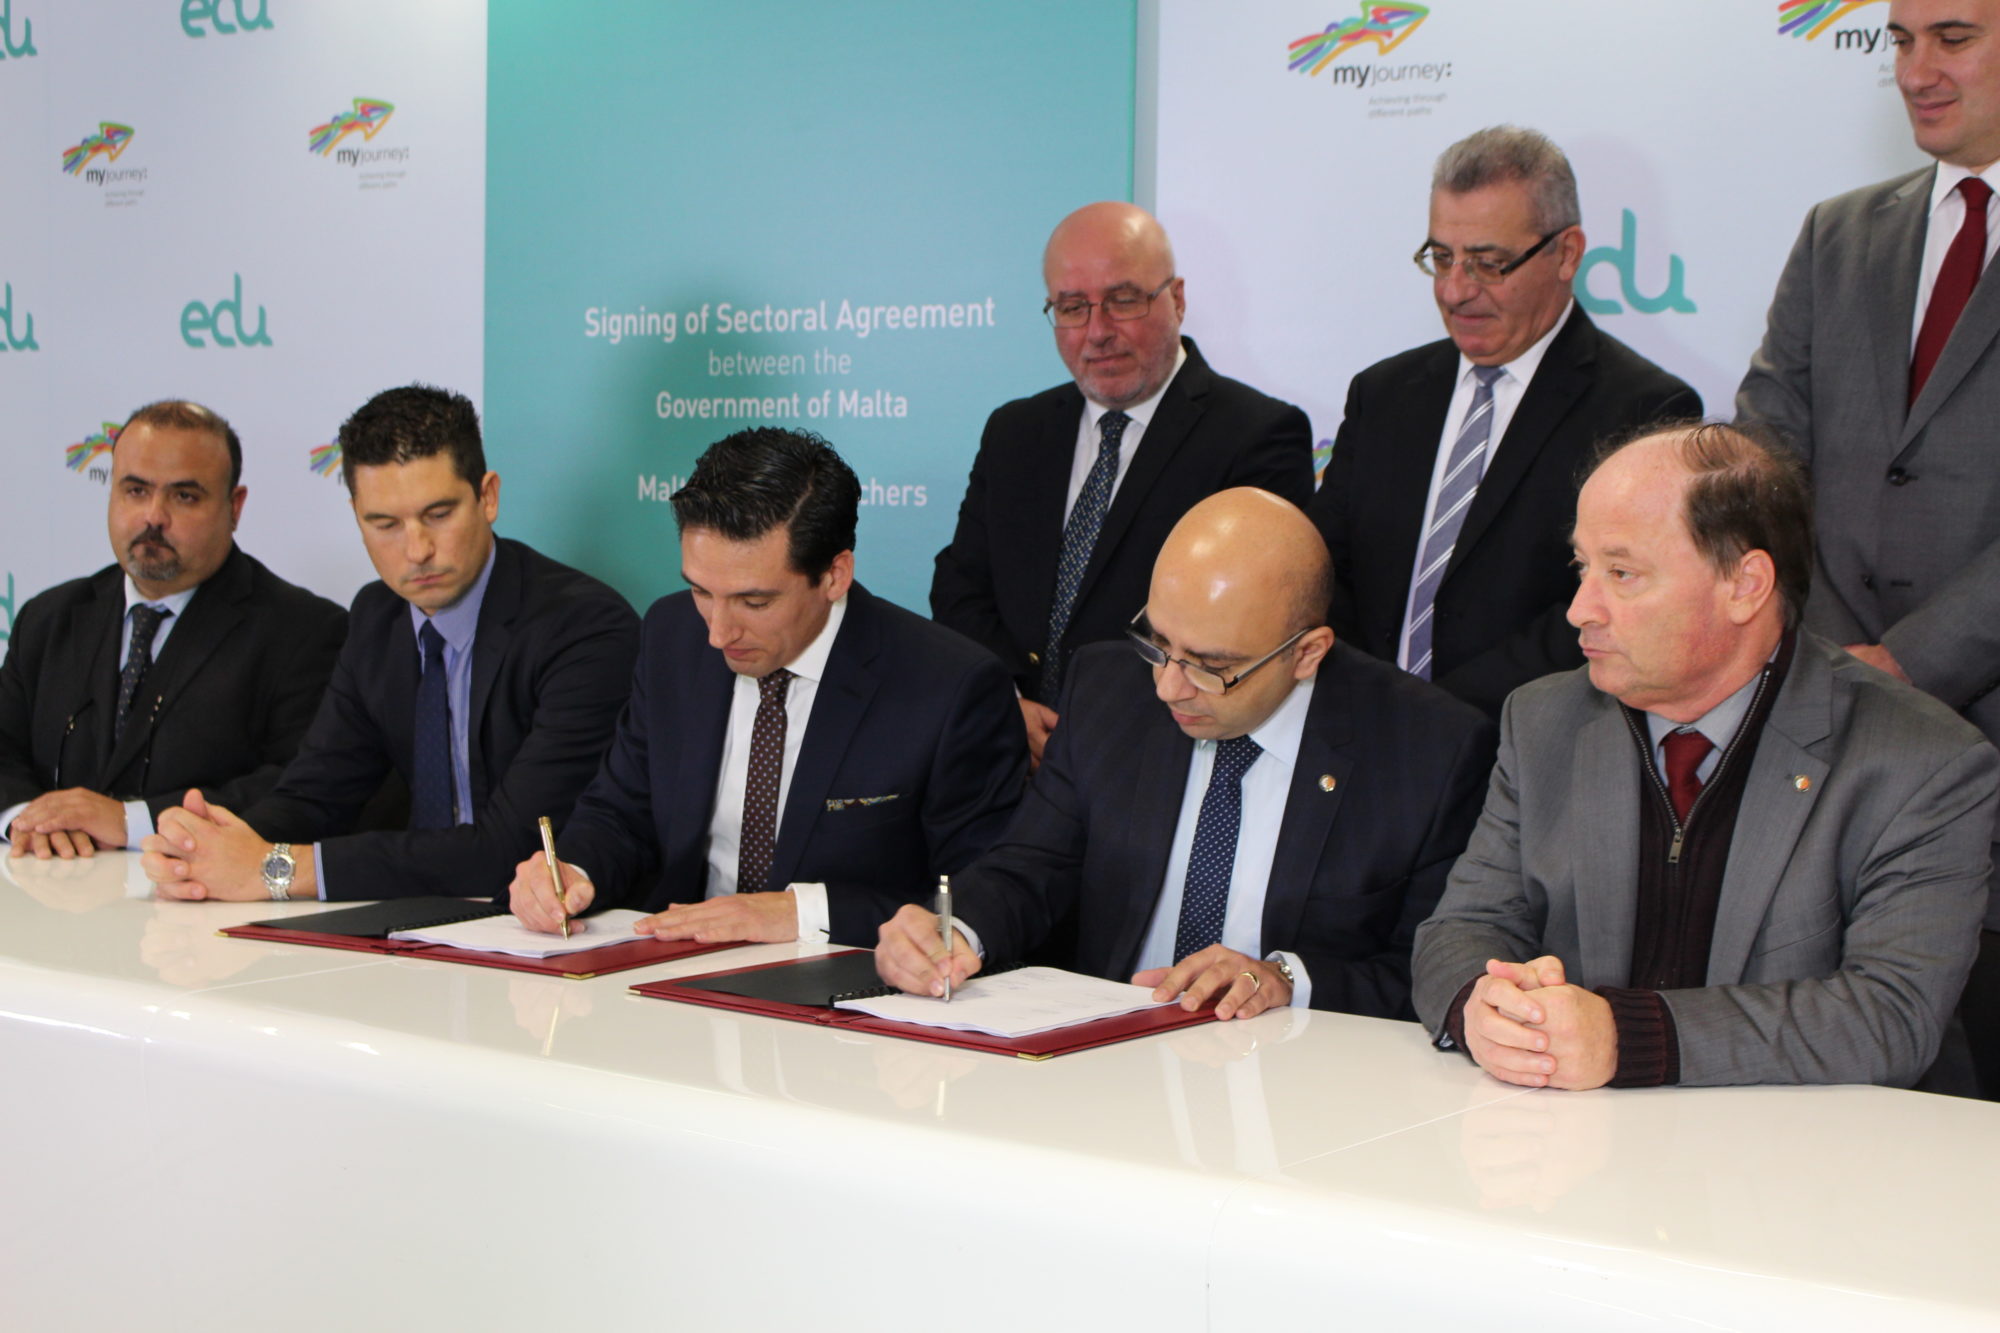 Sectoral Agreement signed between MUT and Education Ministry